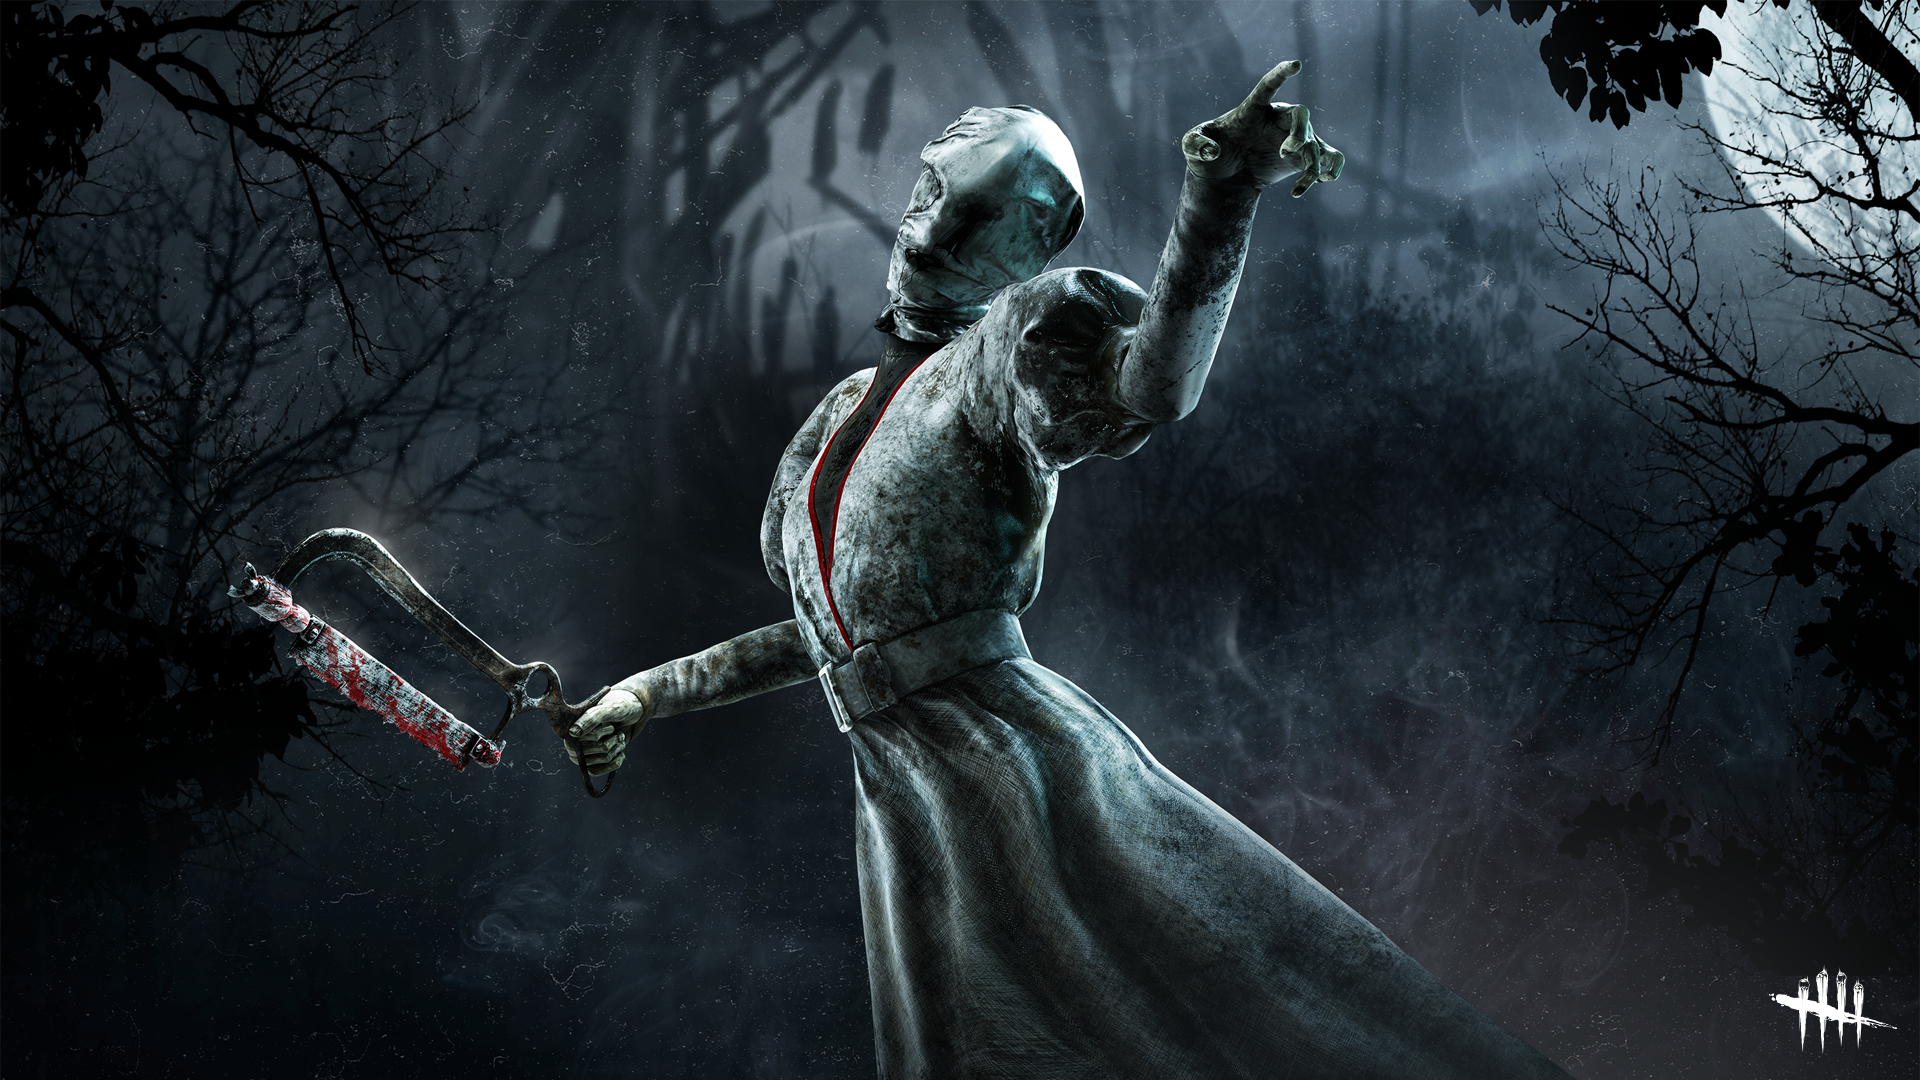 General 1920x1080 Dead by Daylight video games horror video game art